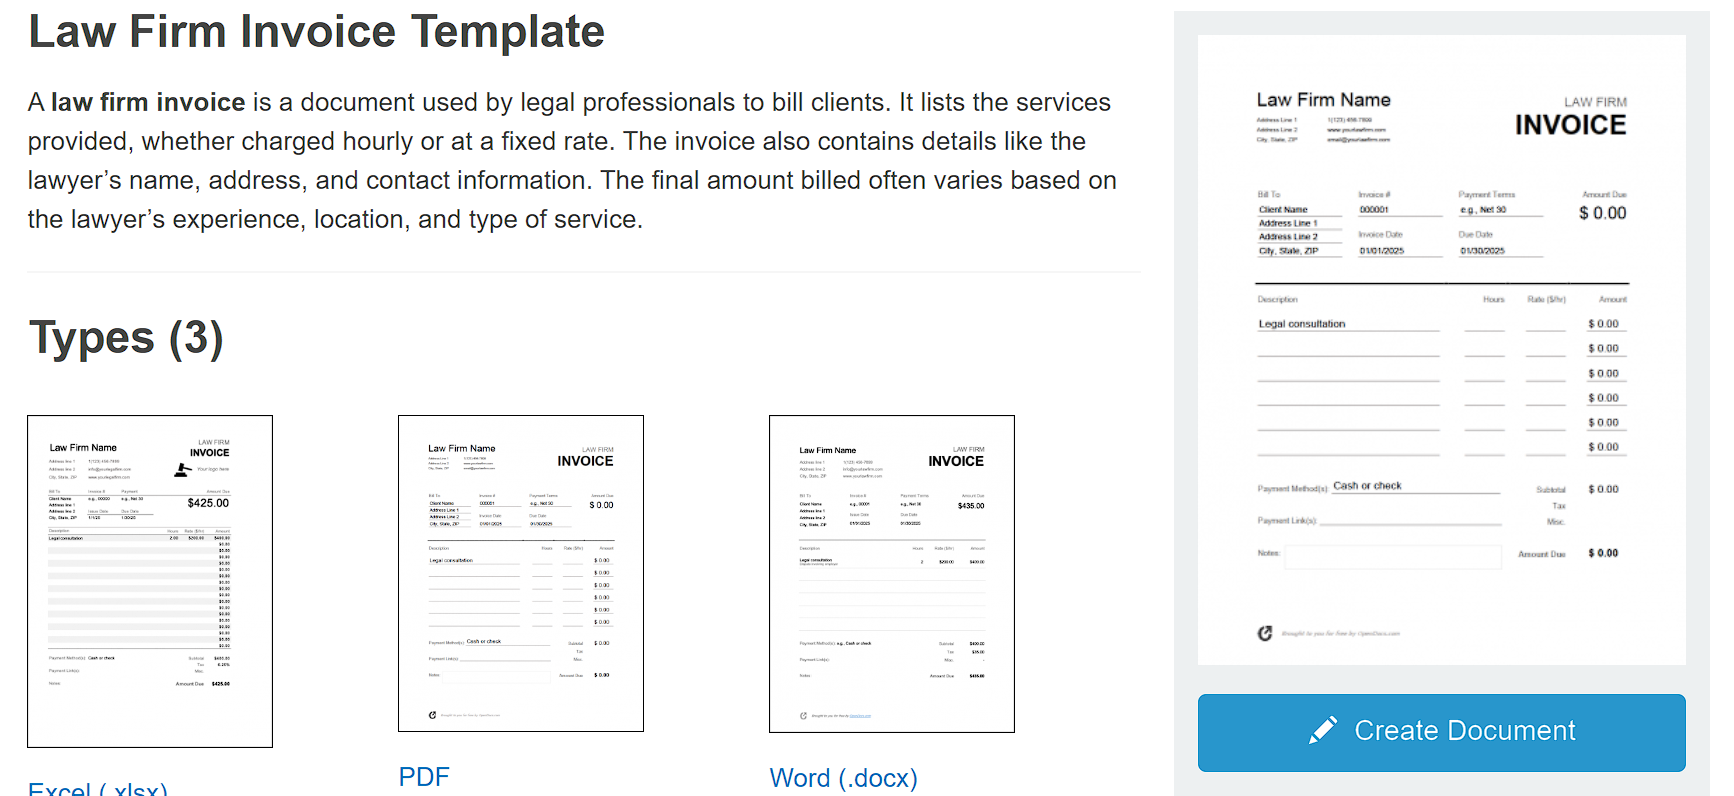 Law Firm Invoice Templates